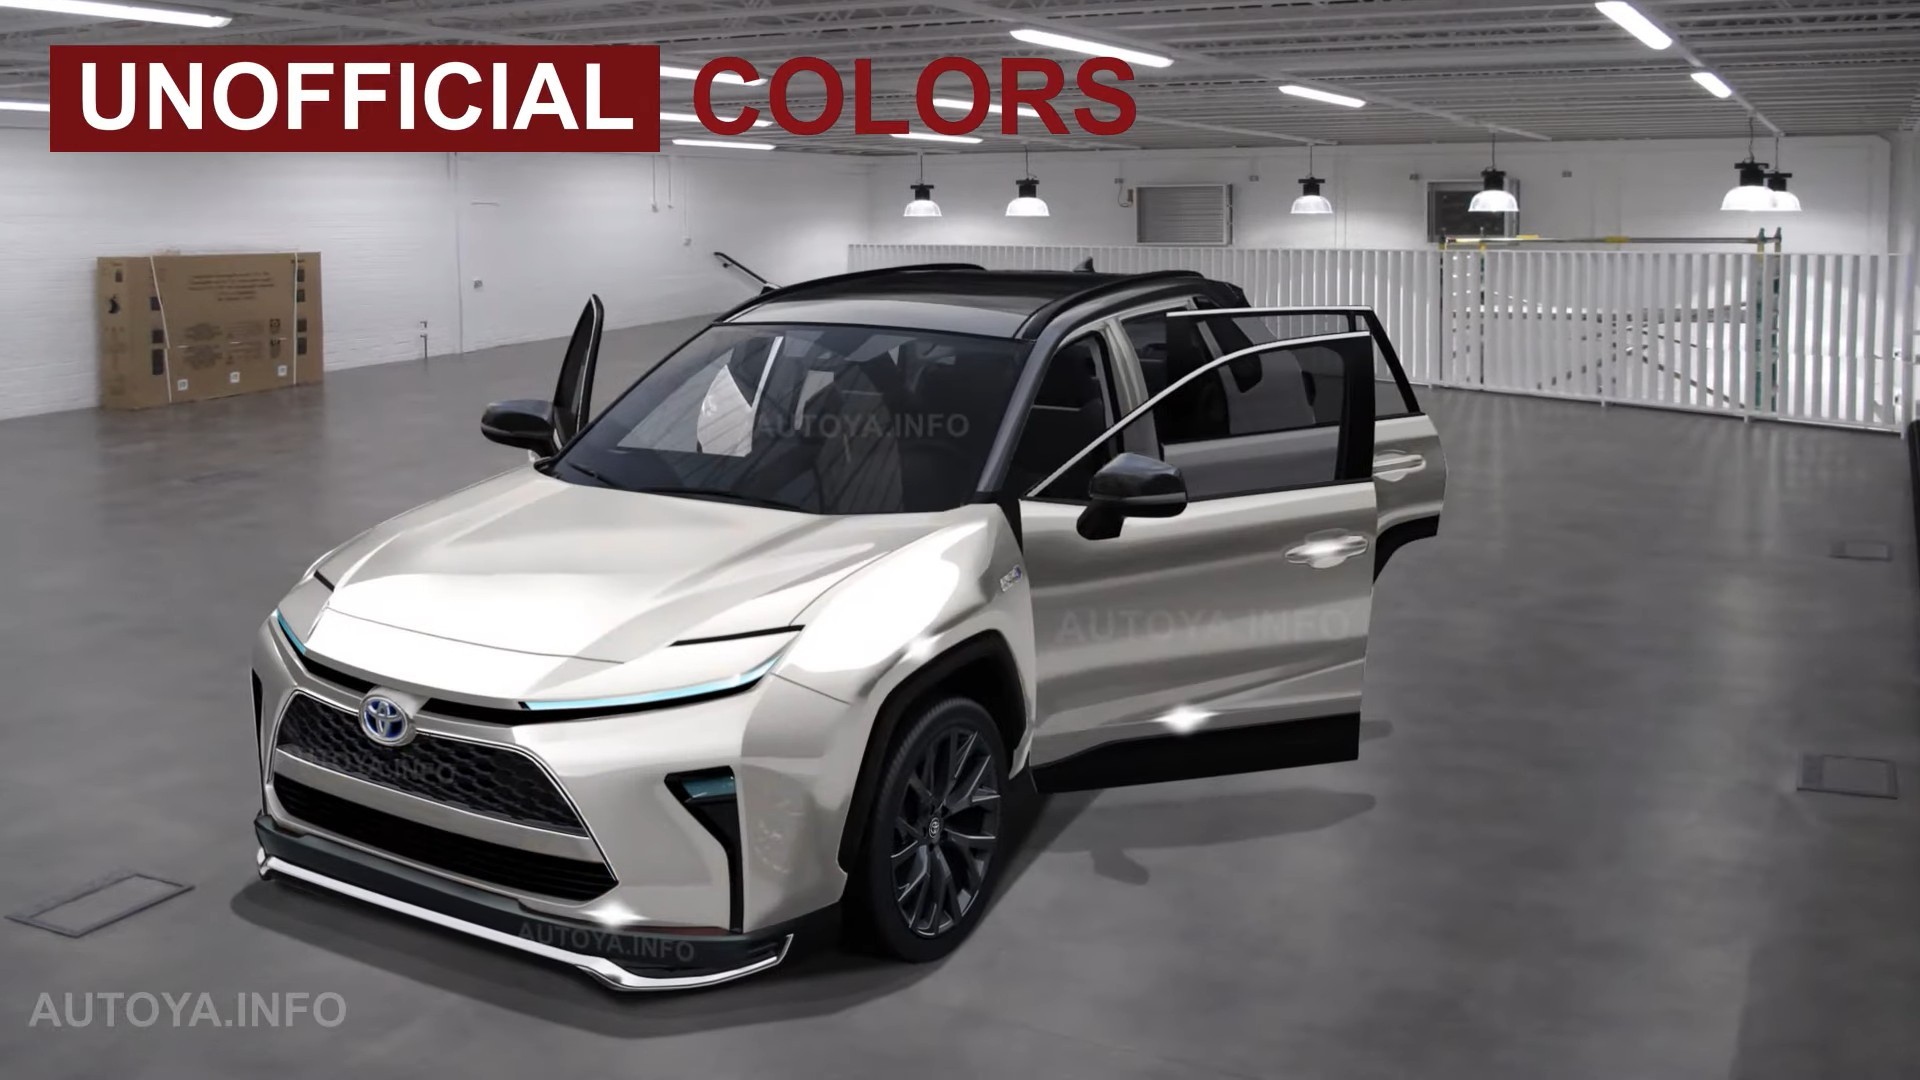 2024 Toyota RAV4 Compact CUV Gets Another Informal Exterior, Interior